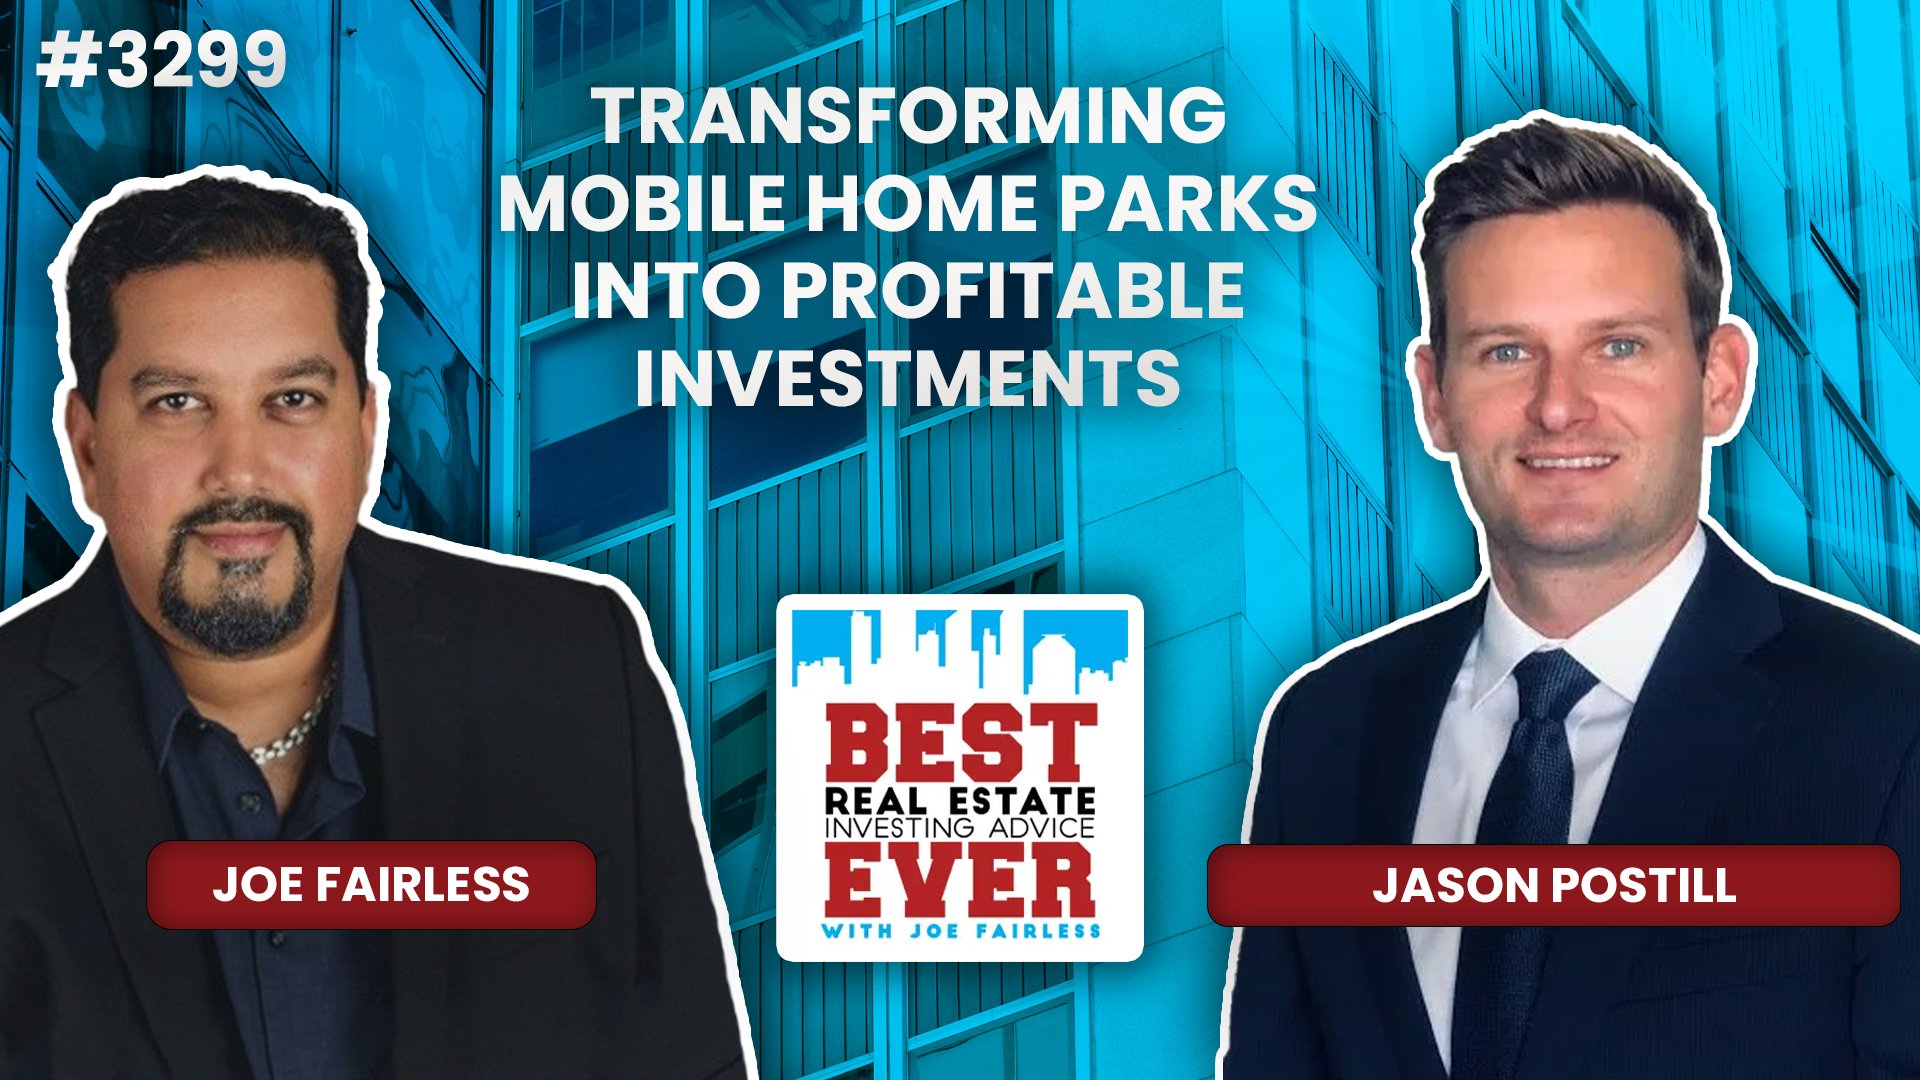 Transforming Mobile Home Parks into Profitable Investments